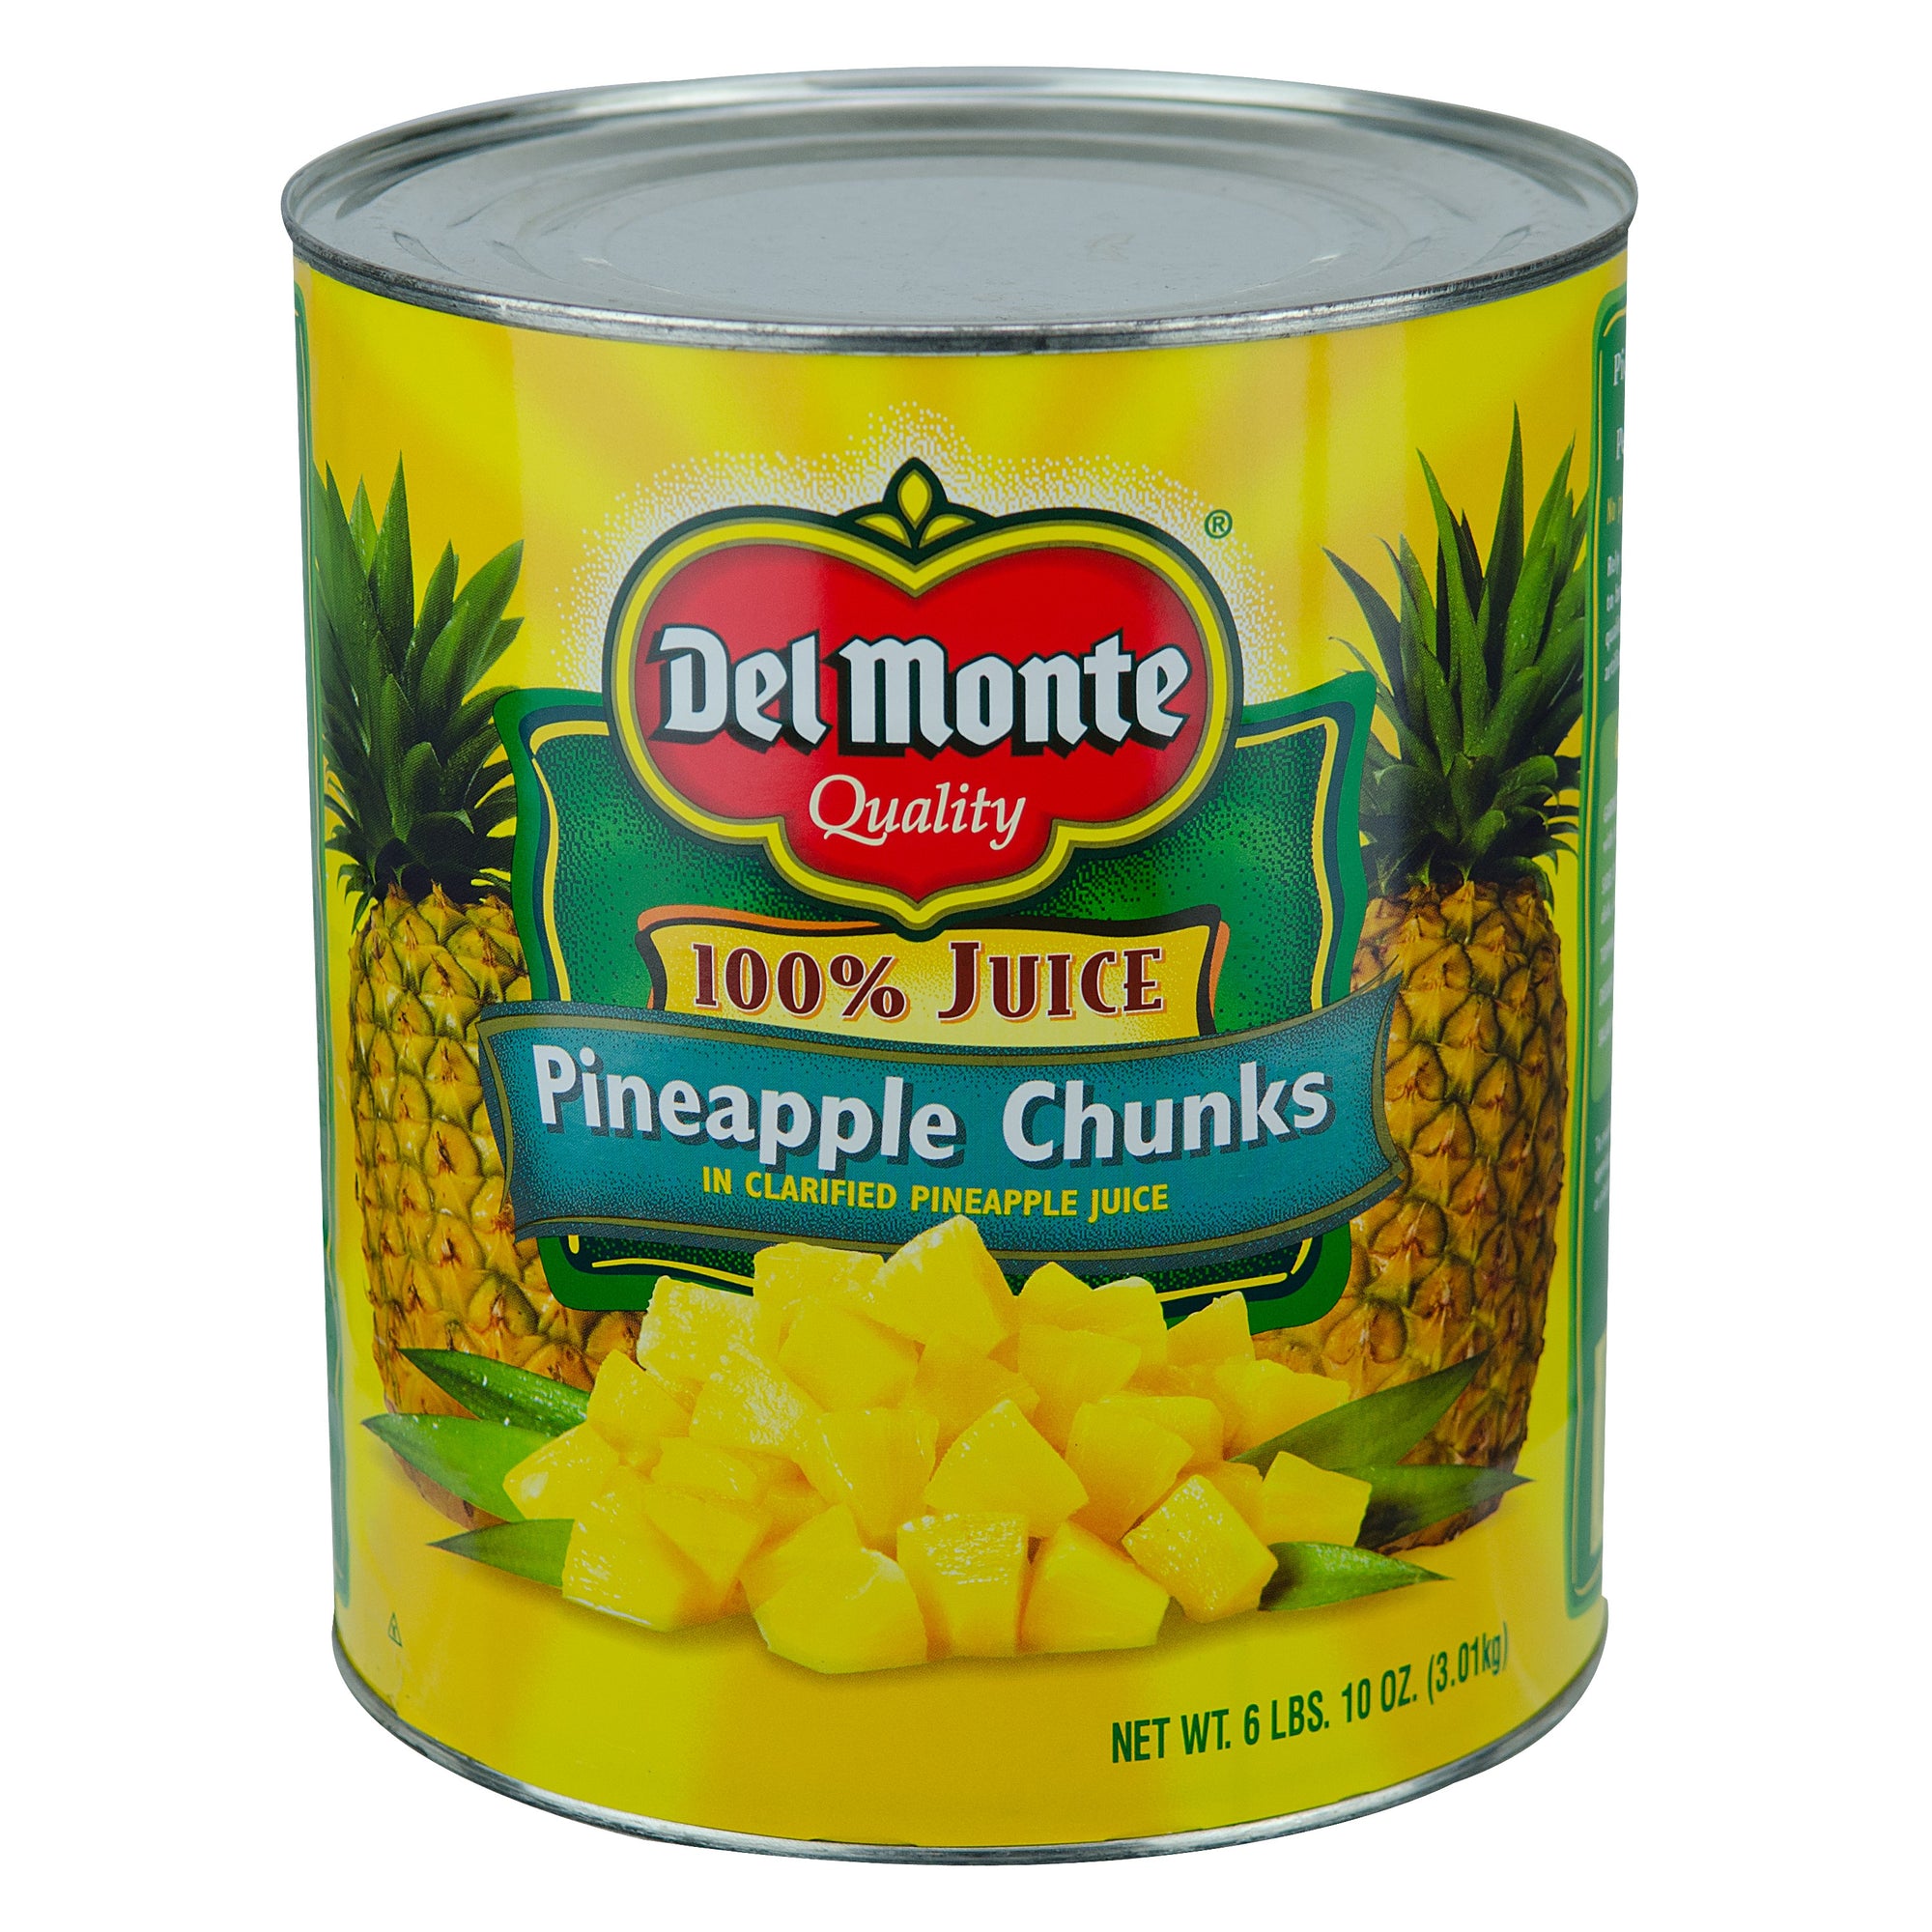 Del Monte Pineapple Chunks in Clarified Pineapple Juice 6/106 oz. Can